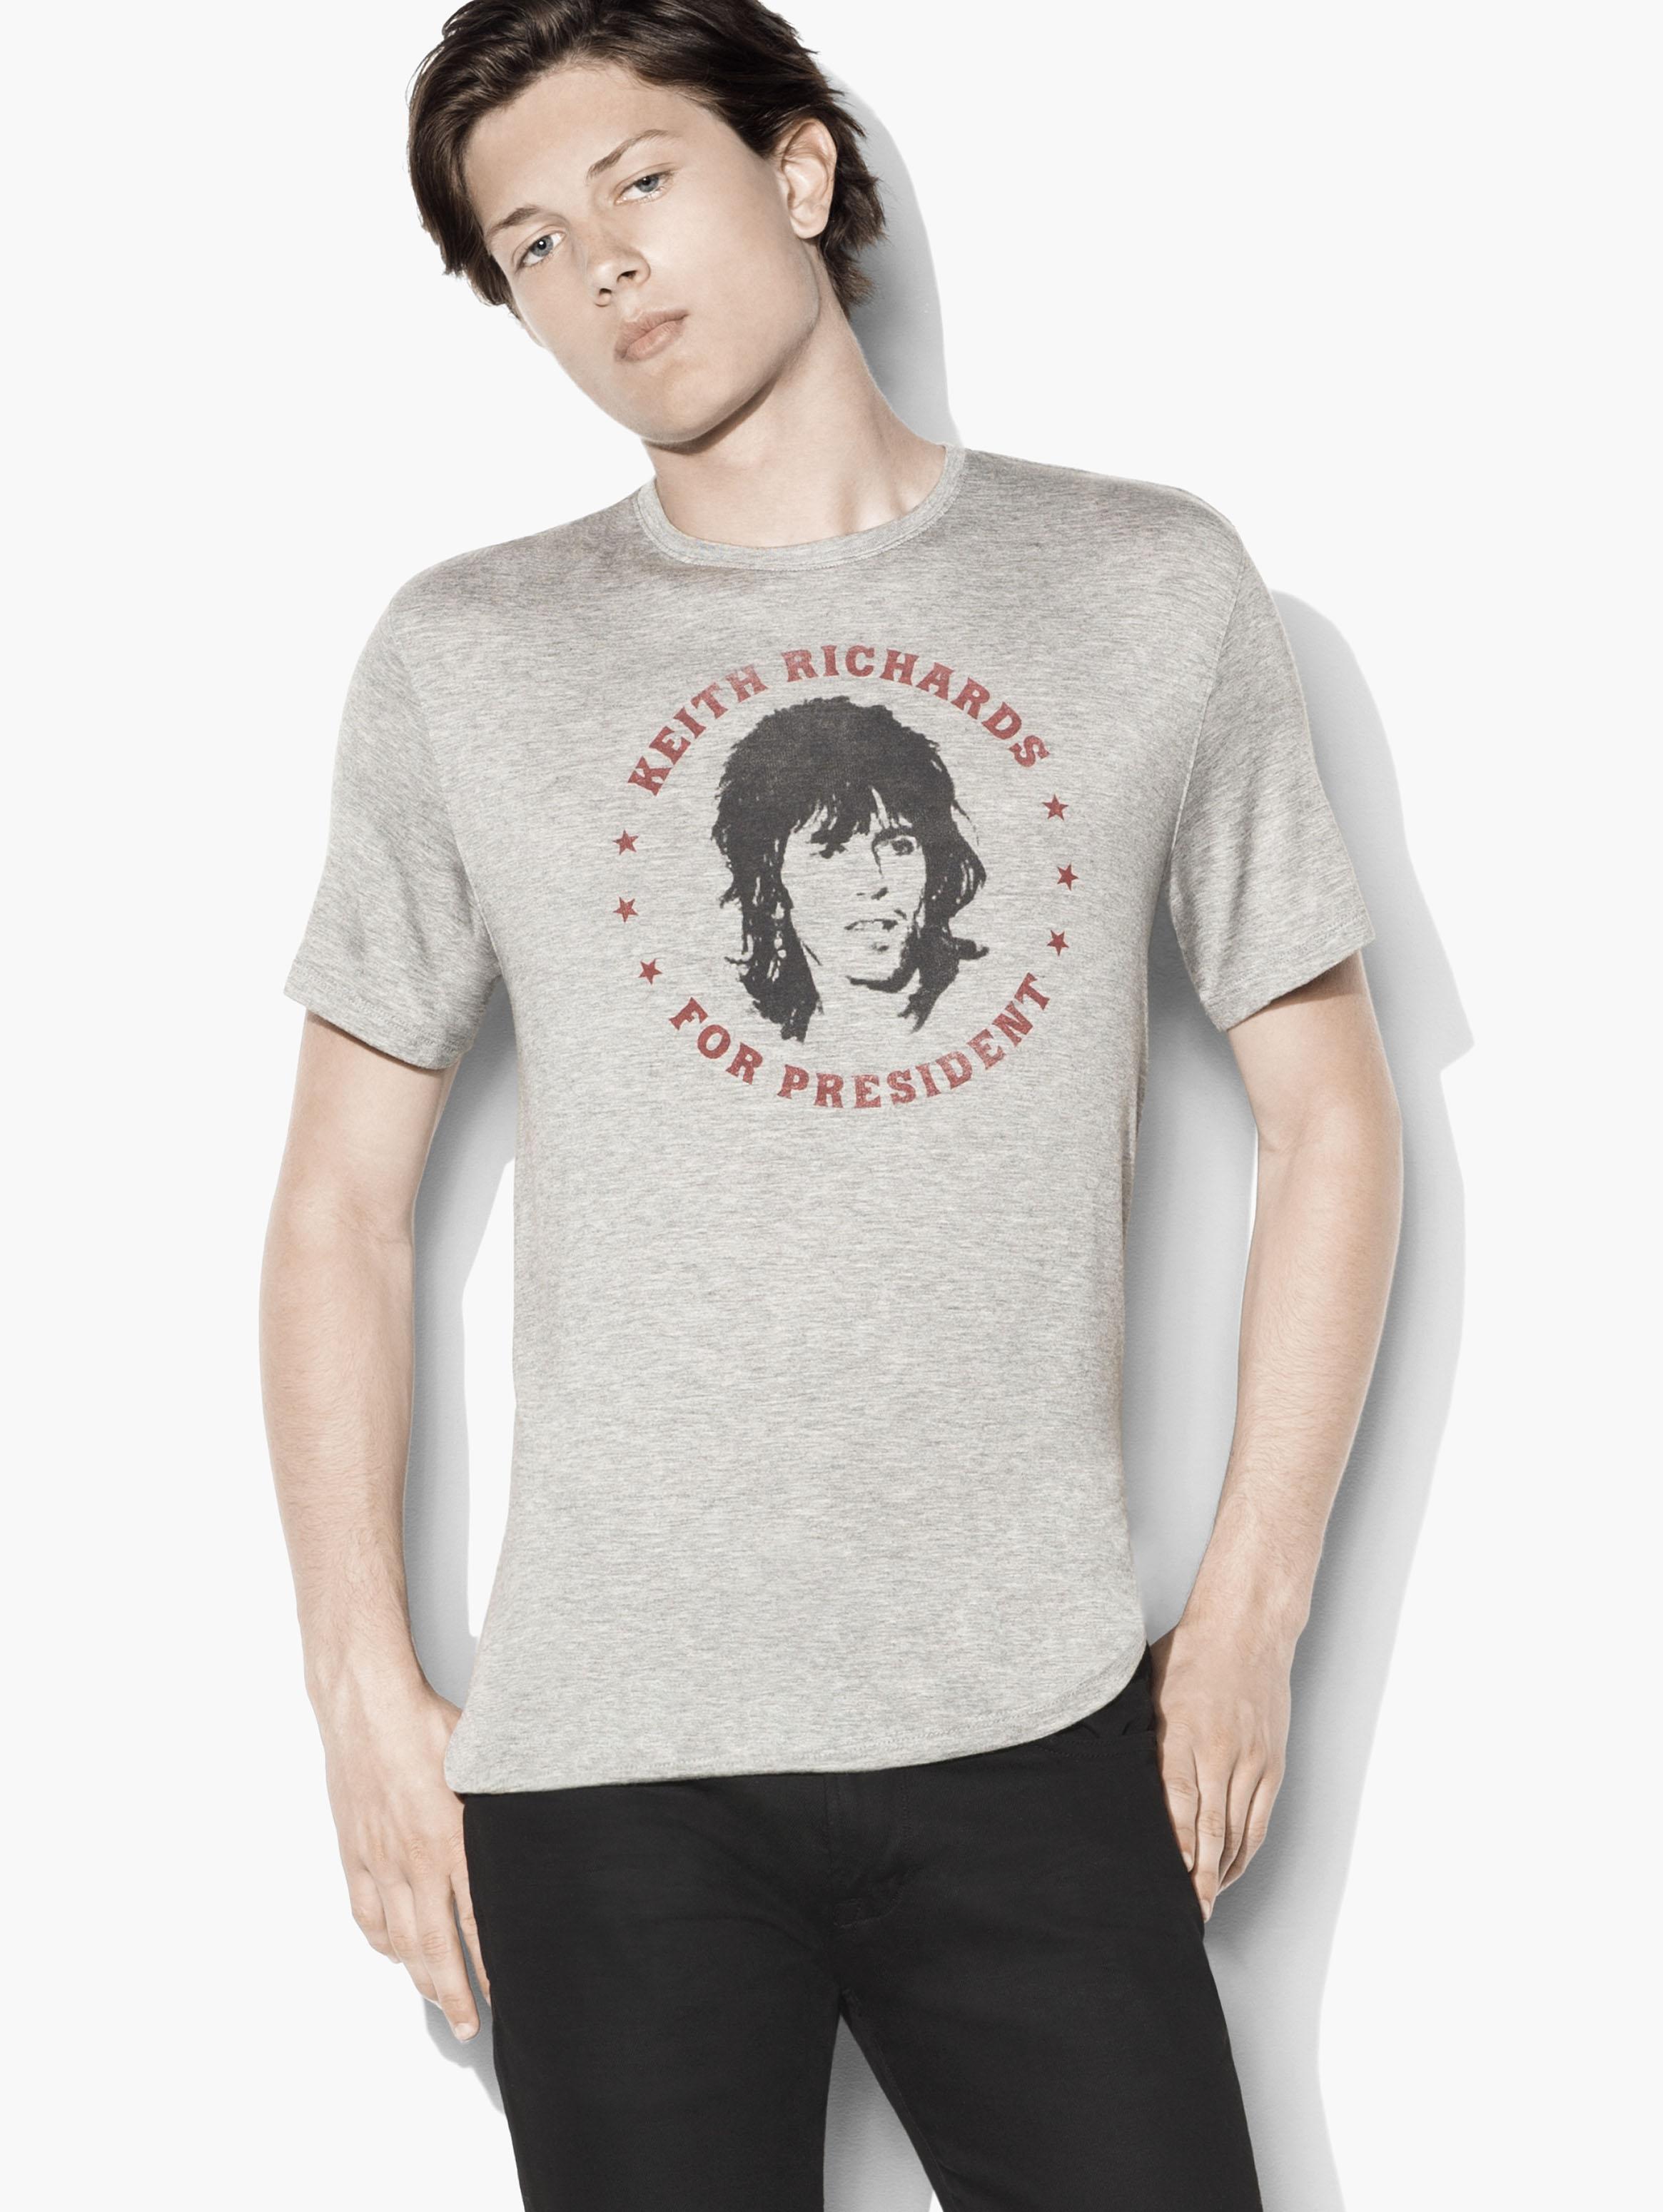 Keith Richards for President Graphic Tee image number 1